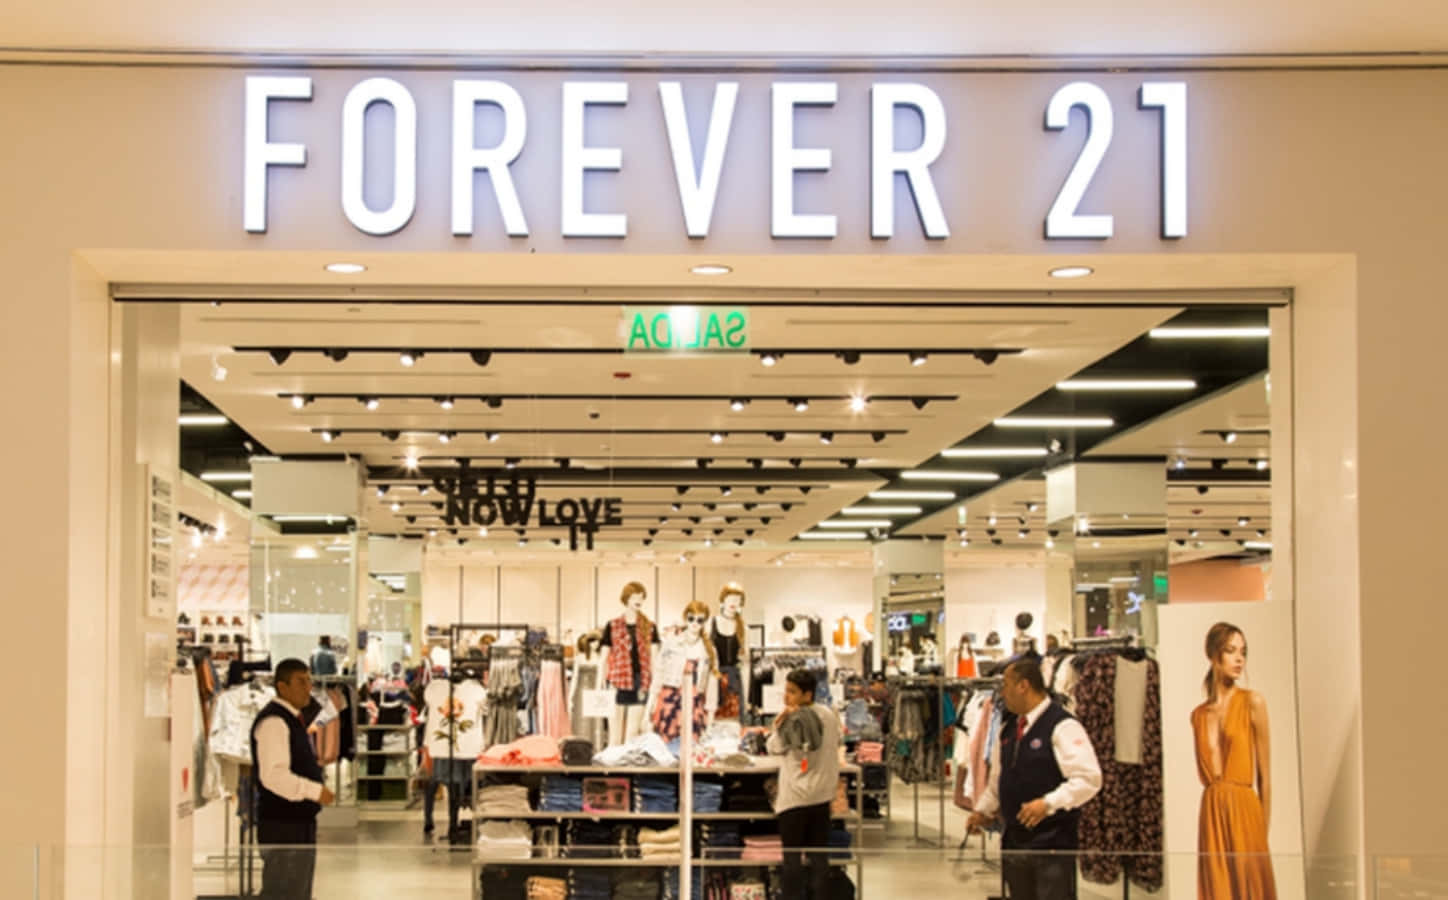 Look good and feel even better with the stylish clothing from Forever 21.